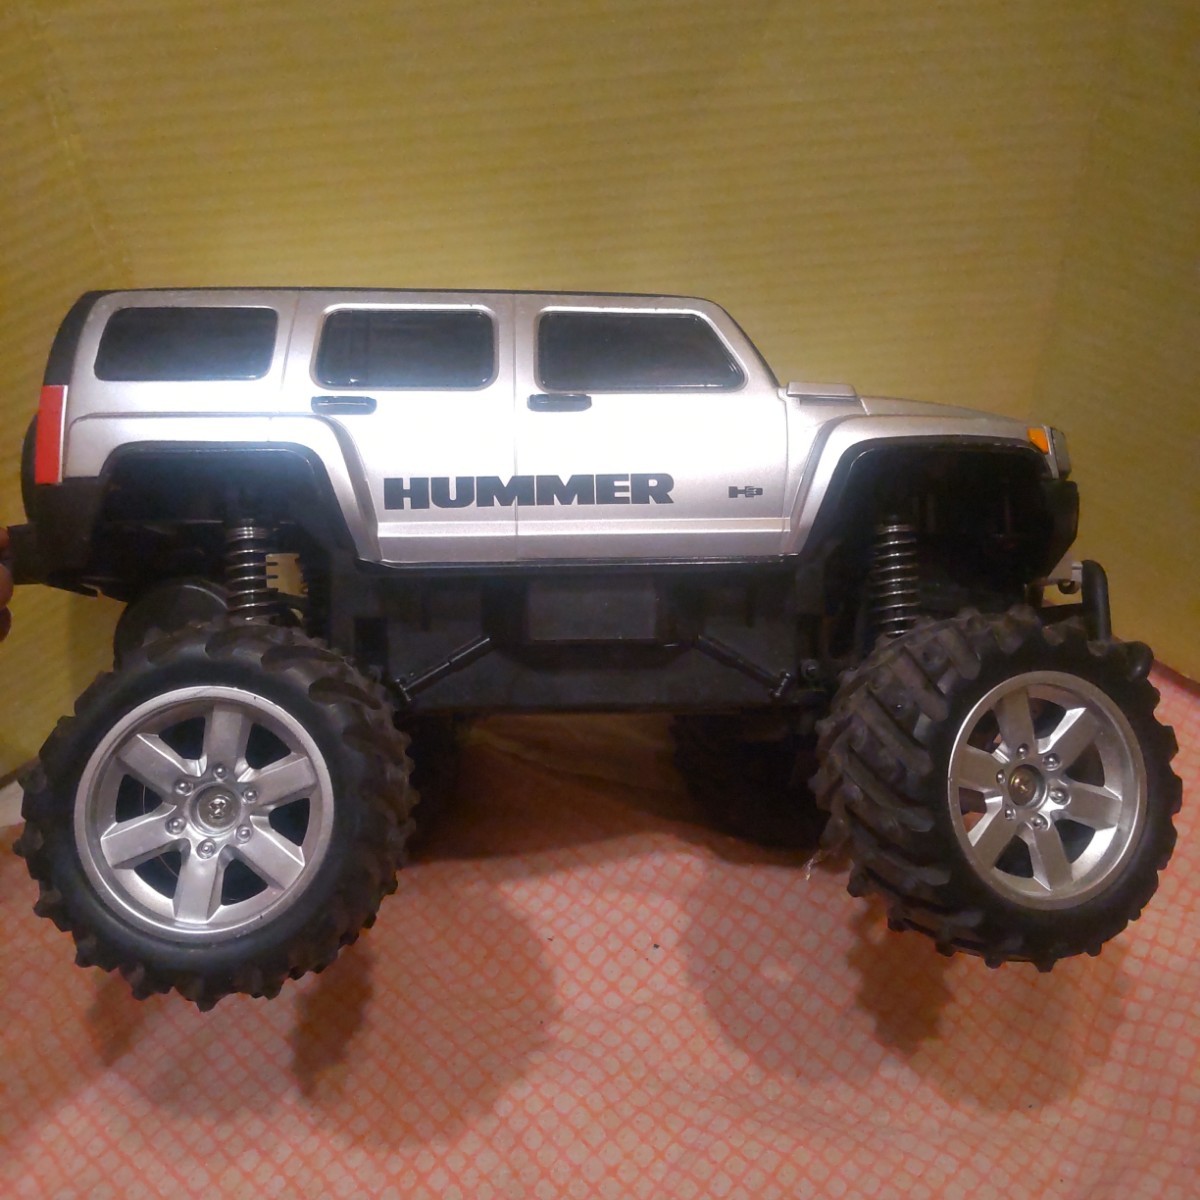  Hummer H3 radio-controller navy blue silver body only junk RC radio controlled car including in a package un- possible 